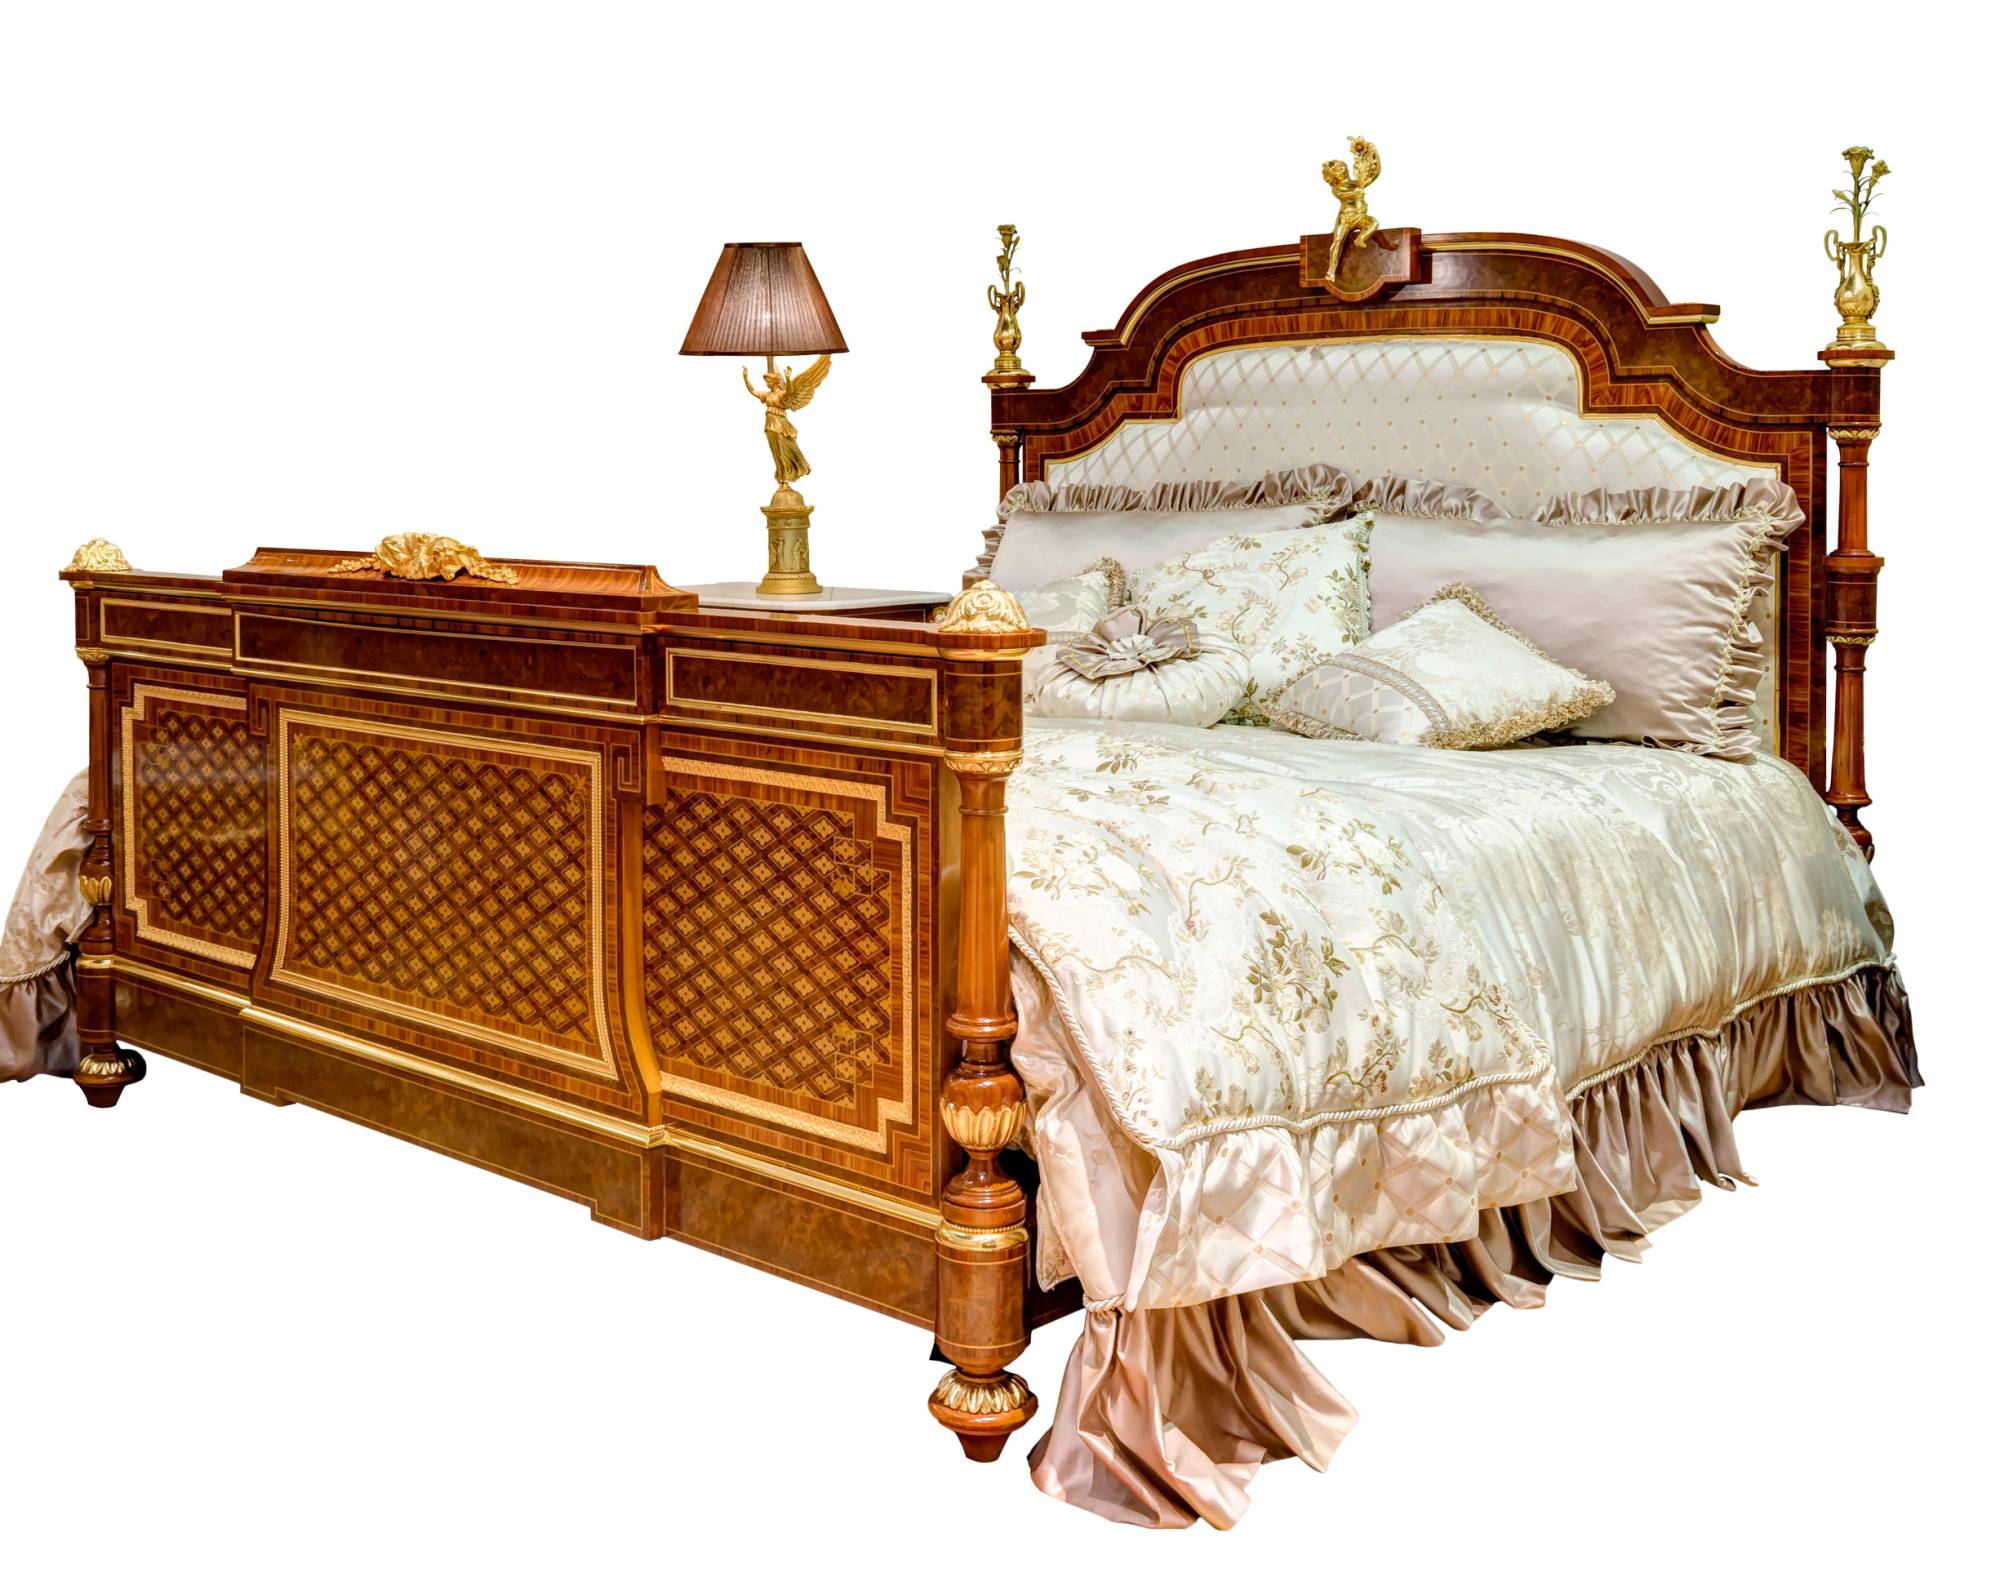 ART. 2088 – The elegance of luxury classic Beds made in Italy by C.G. Capelletti.